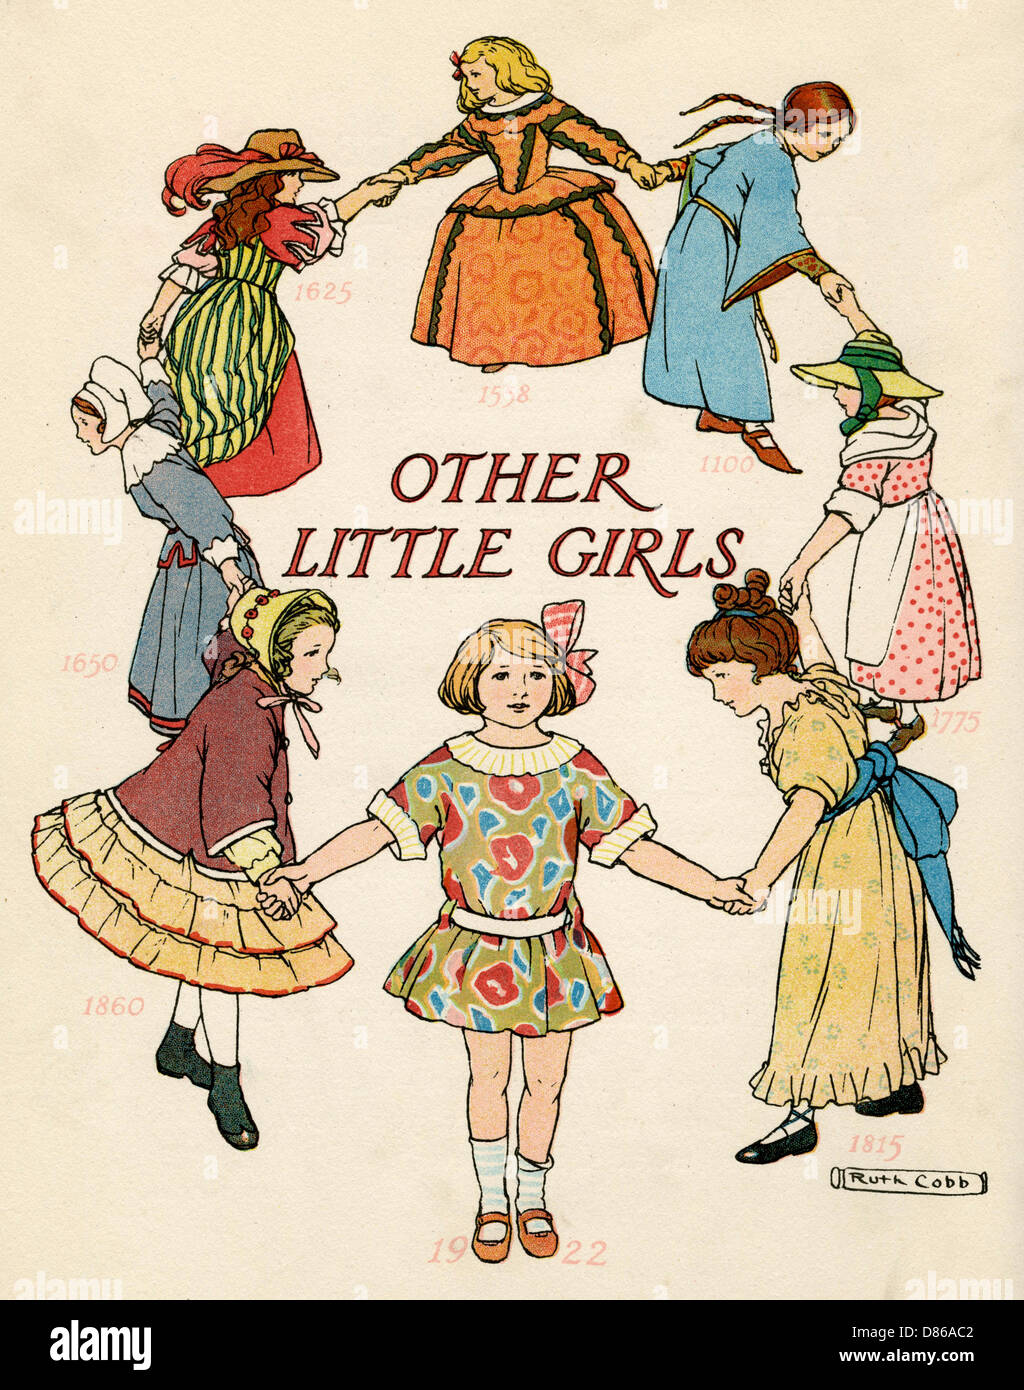 Other Little Girls from various periods in history Stock Photo